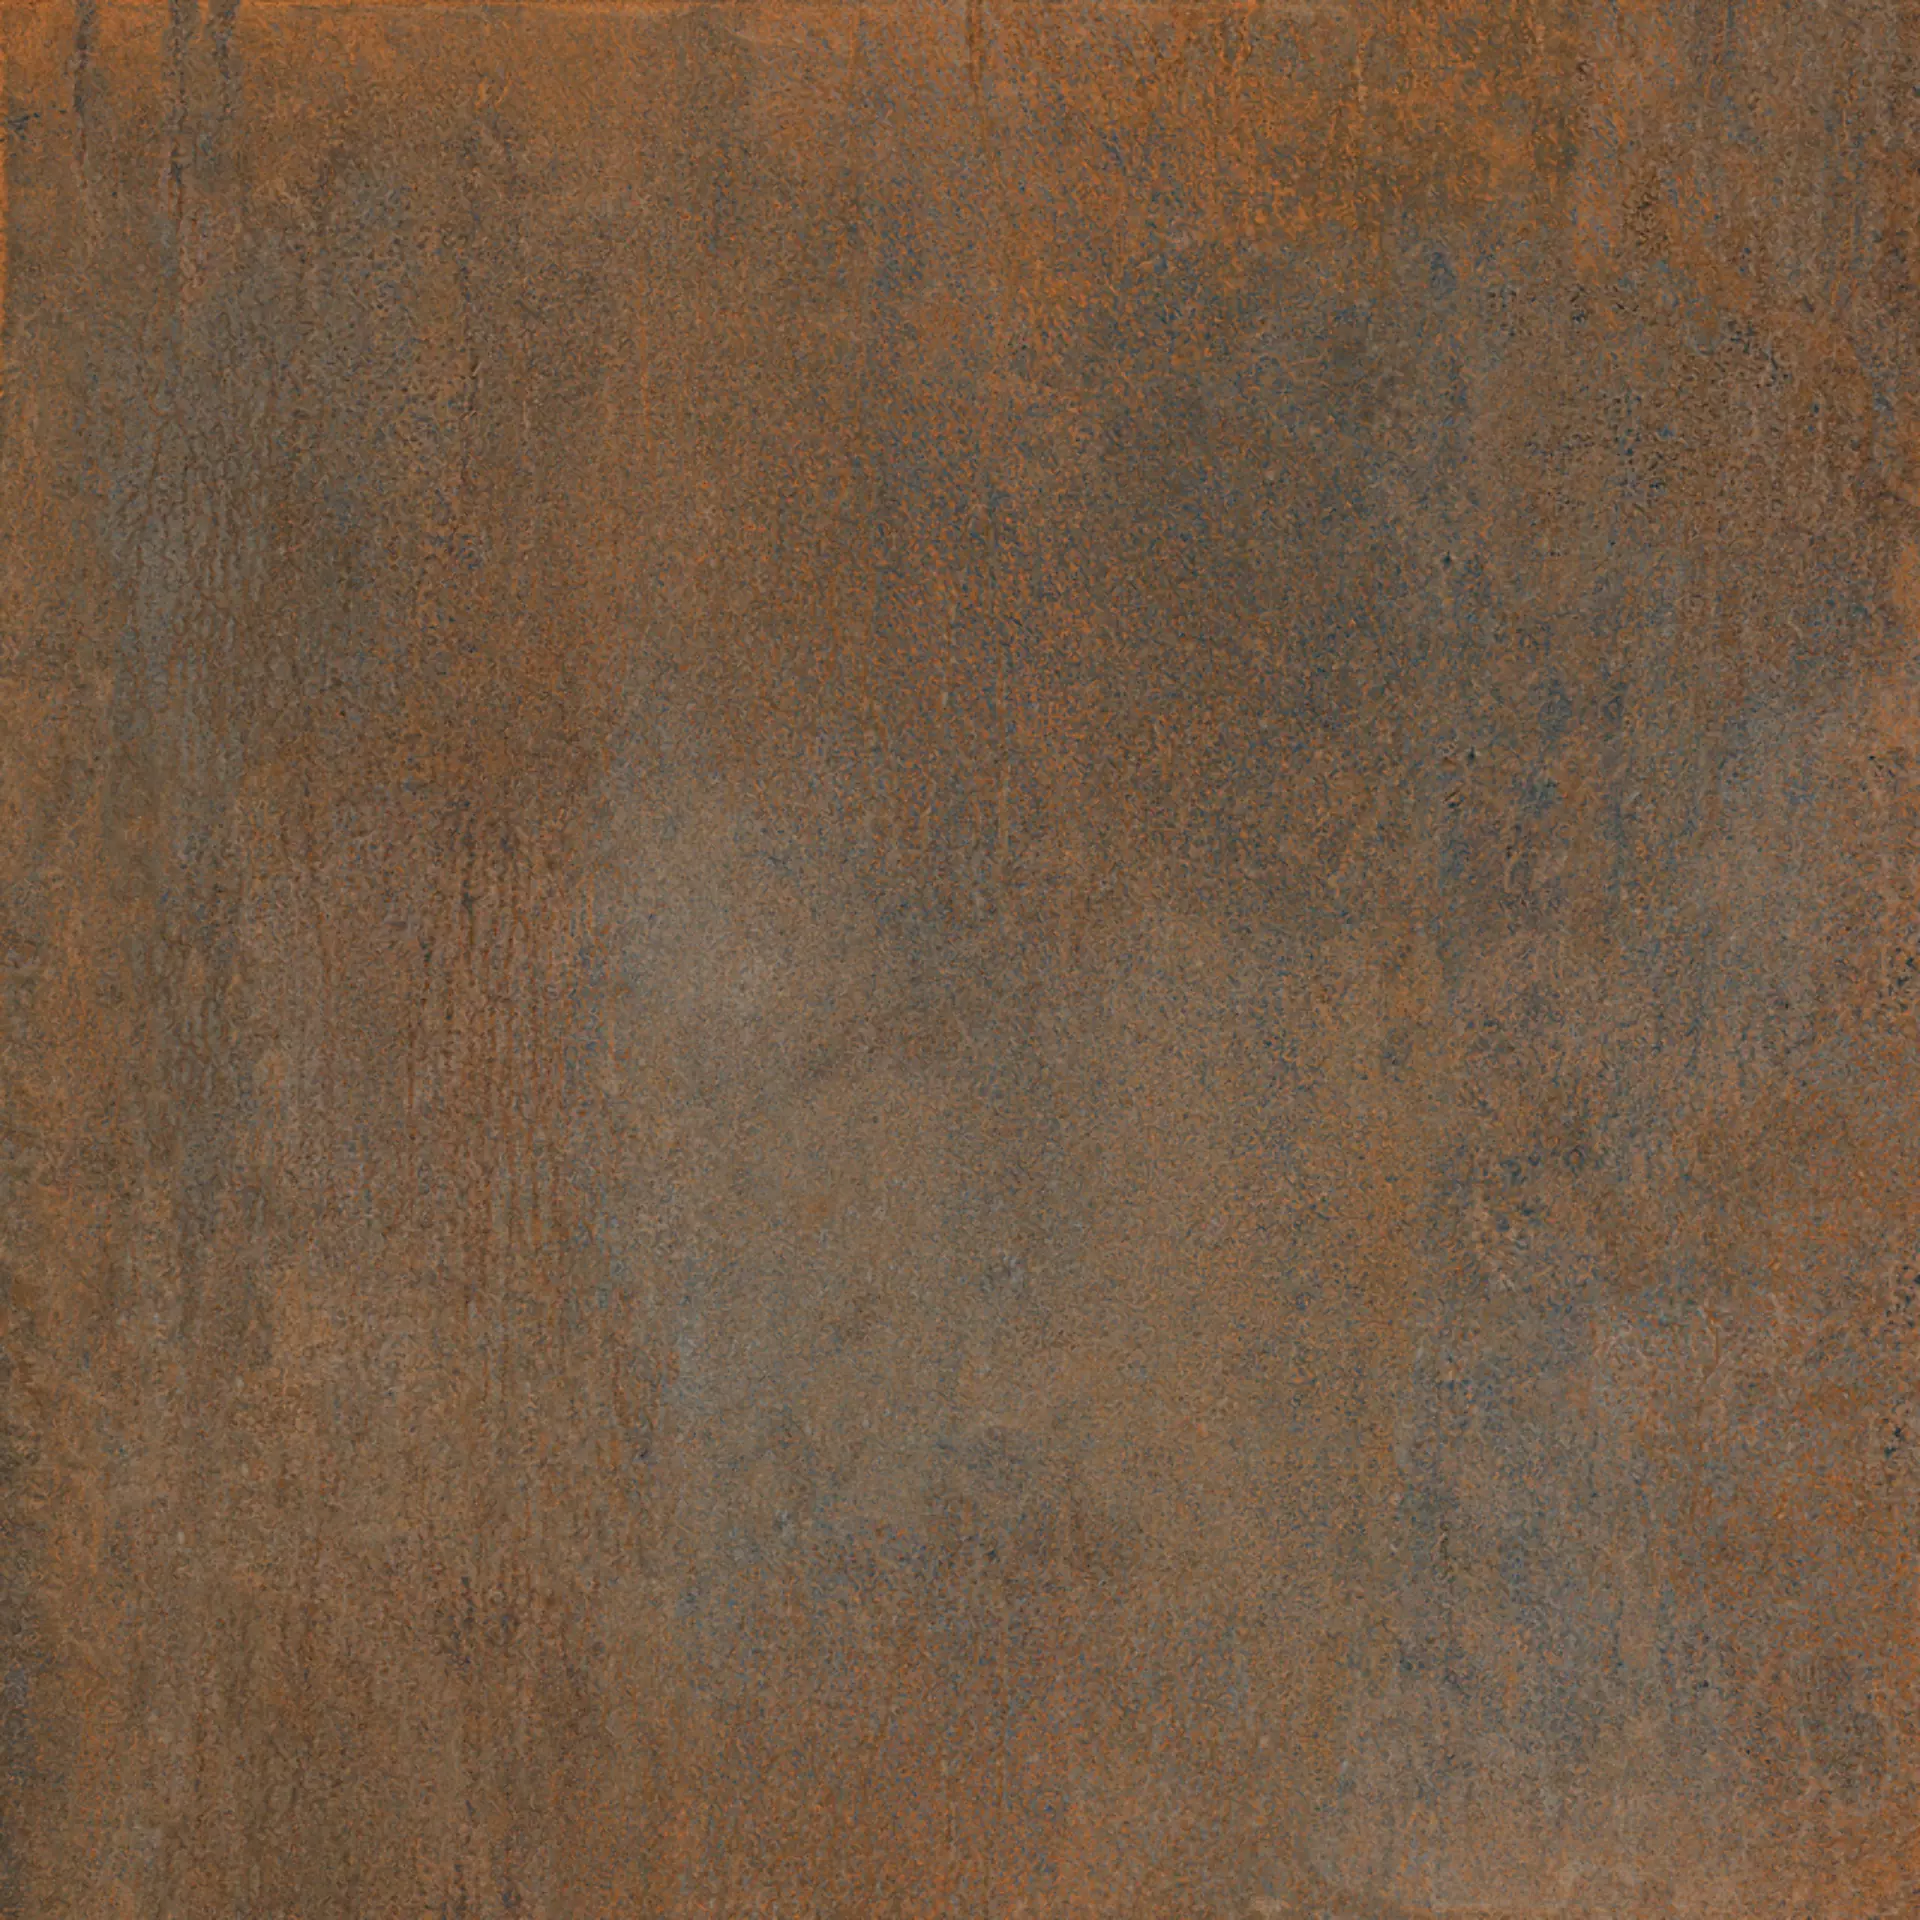 Sant Agostino Oxidart Copper Natural CSAOX7CO12 120x120cm rectified 10mm